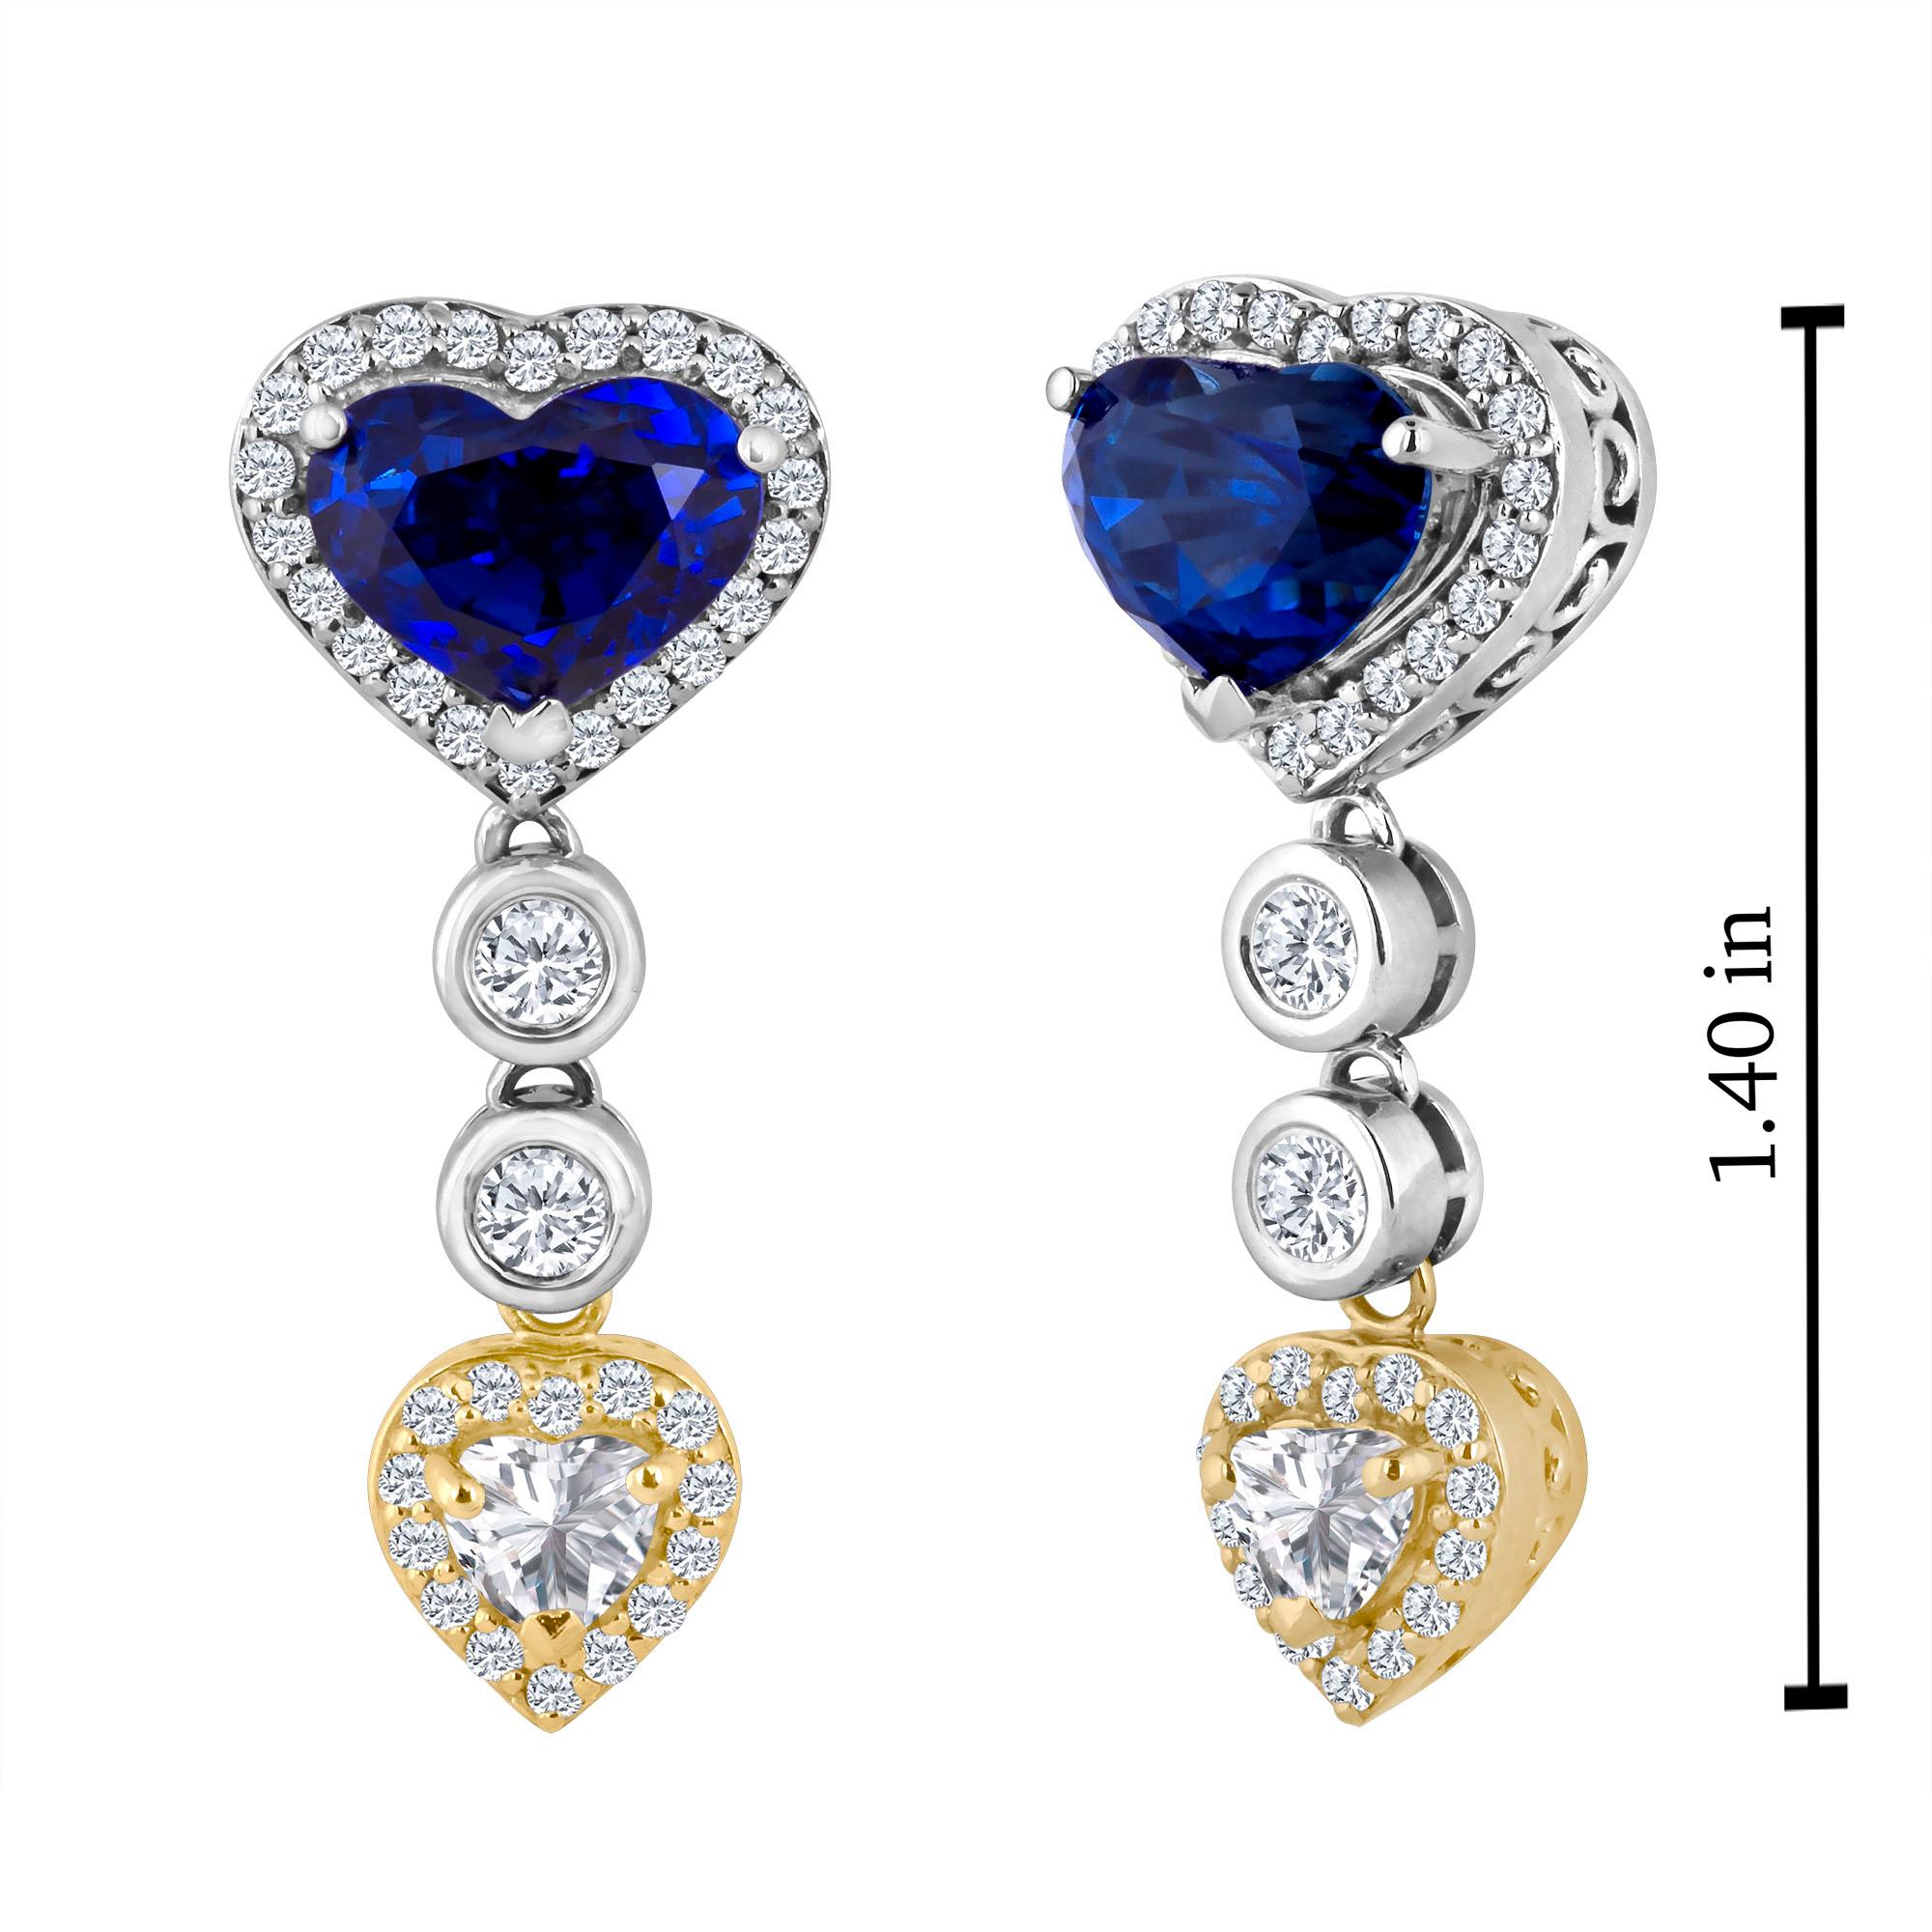 Hand made in the Emilio Jewelry Factory, A gorgeous pair of matching Gem quality perfect Certified Ceylon Sapphires at the top totaling 8.04 carats. The sapphires are filled with a tremendous amount of fire, absolutely clean stones, and rich blue